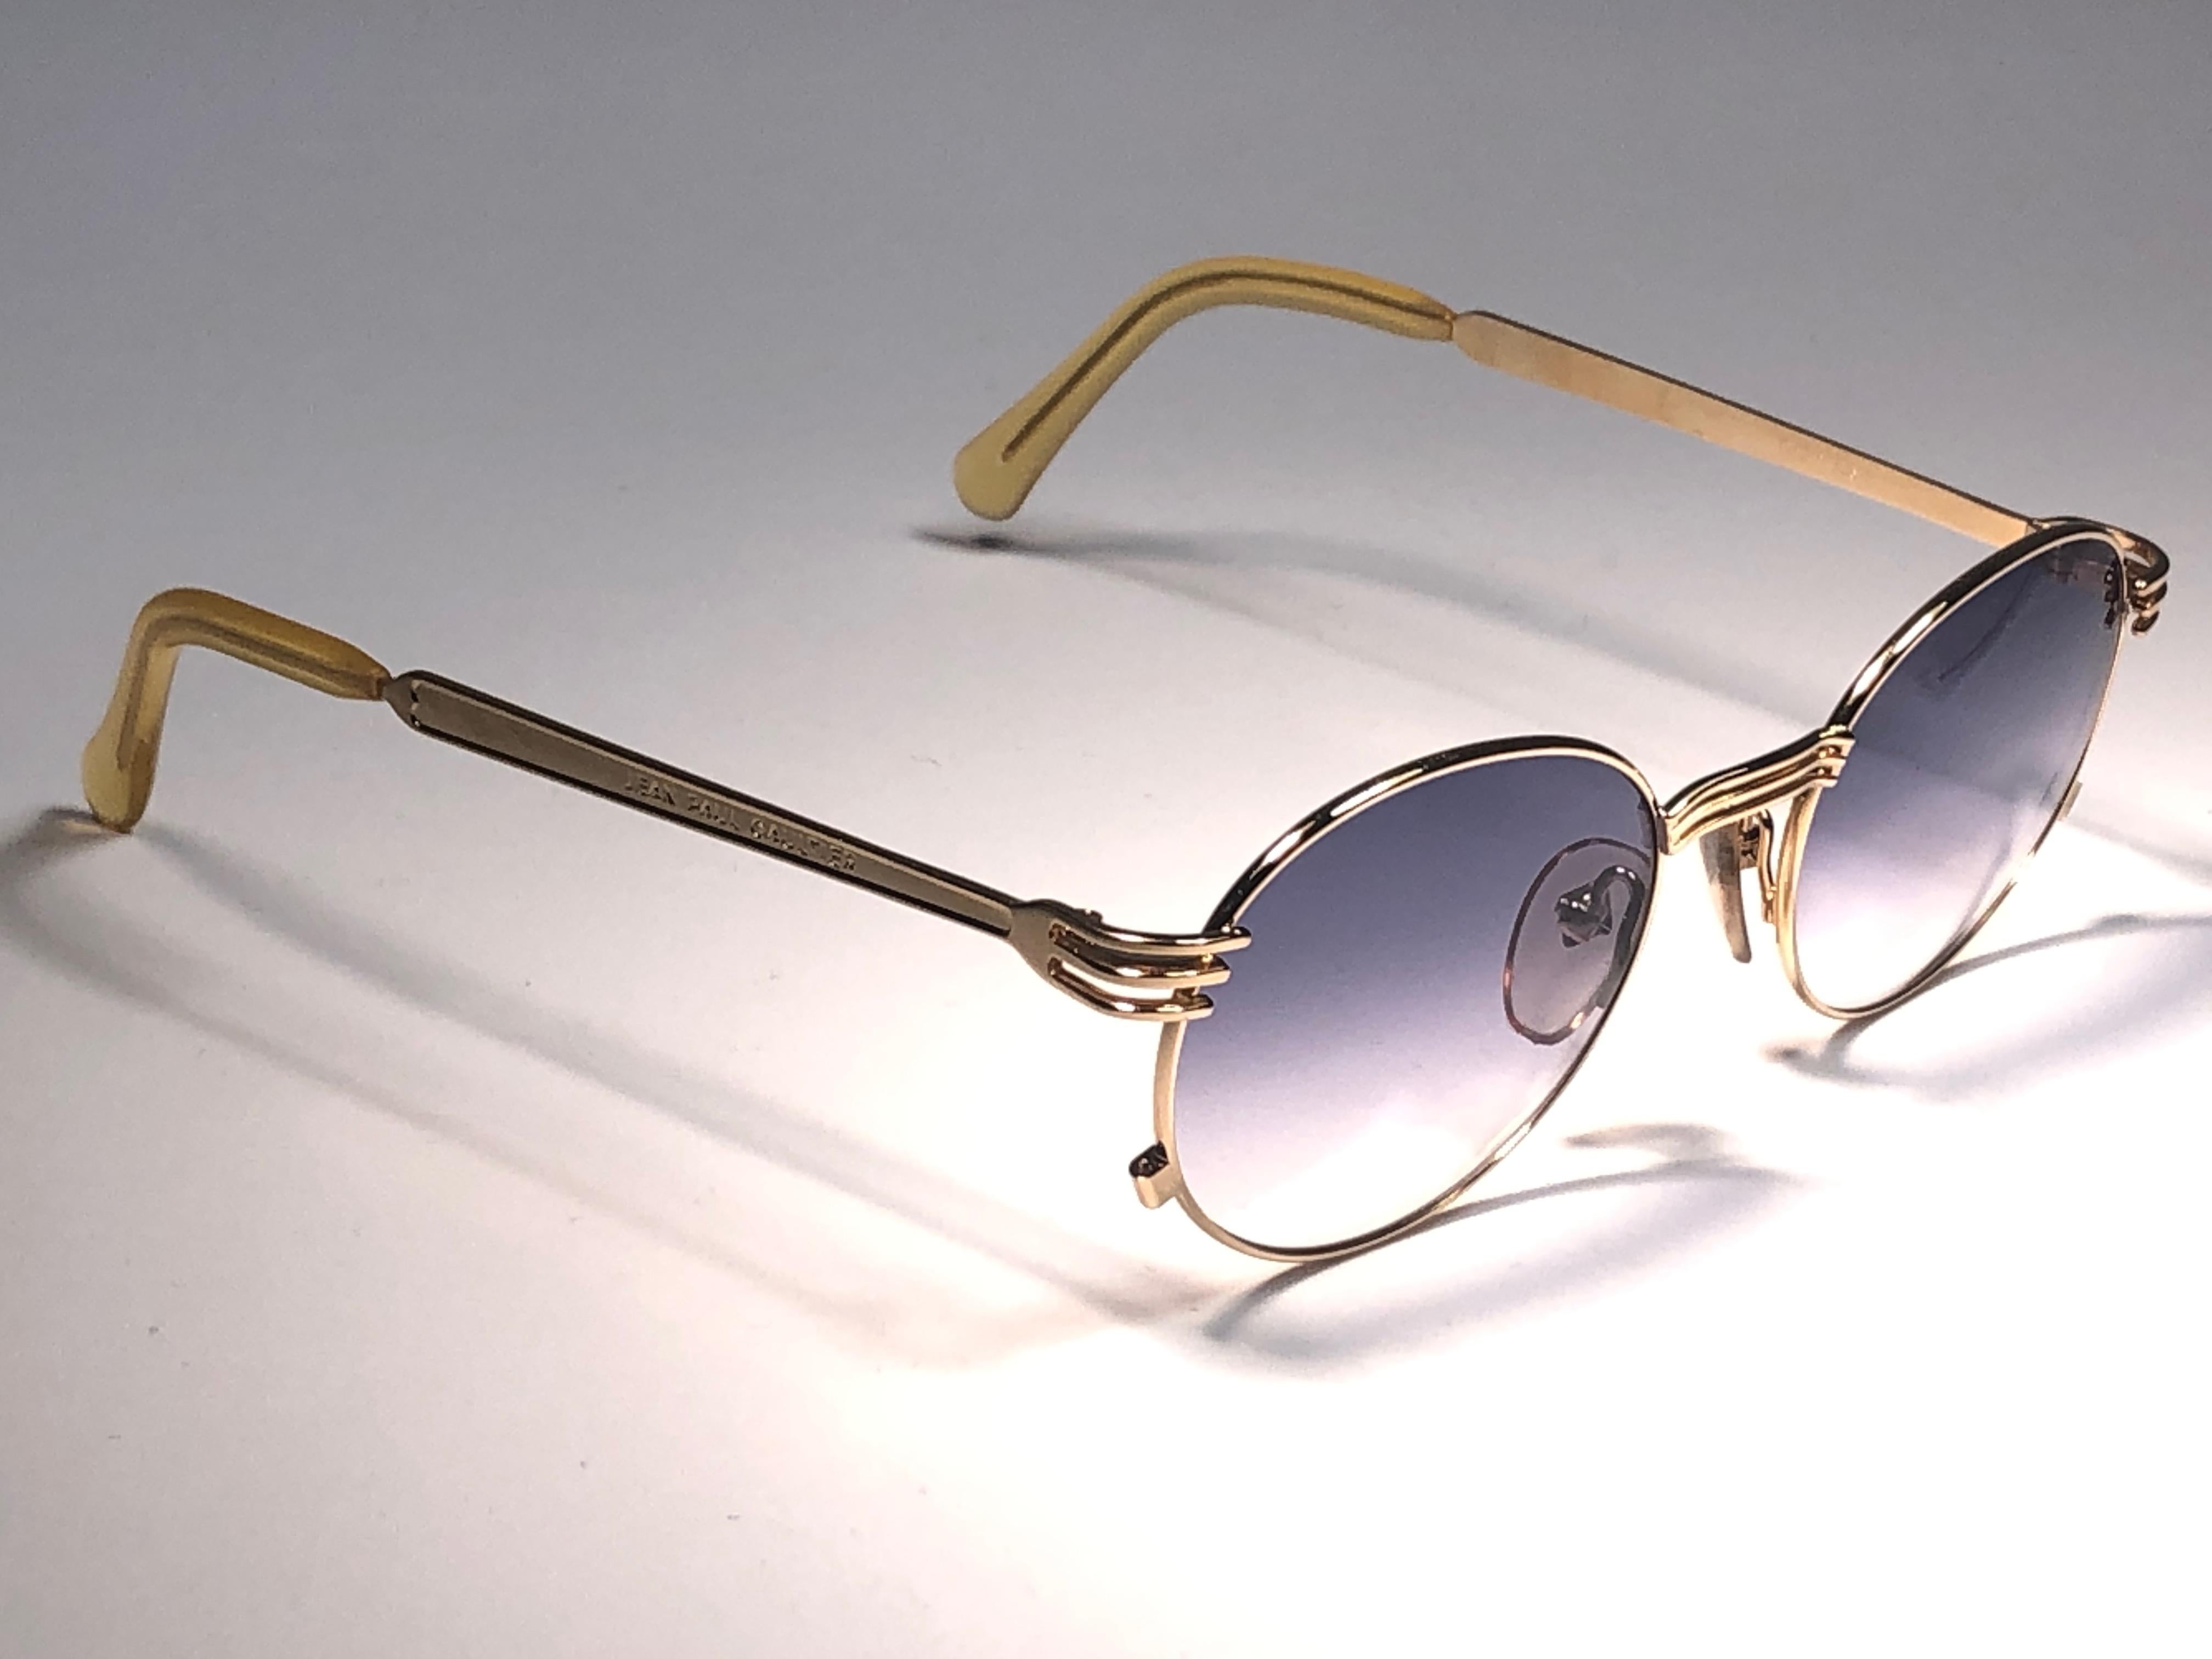 New Jean Paul Gaultier medium gold fork details frame. 
Spotless light blue lenses that complete a ready to wear JPG look.

Amazing design with strong yet intricate details.
Design and produced in the 1990's.
New, never worn or displayed.
This item